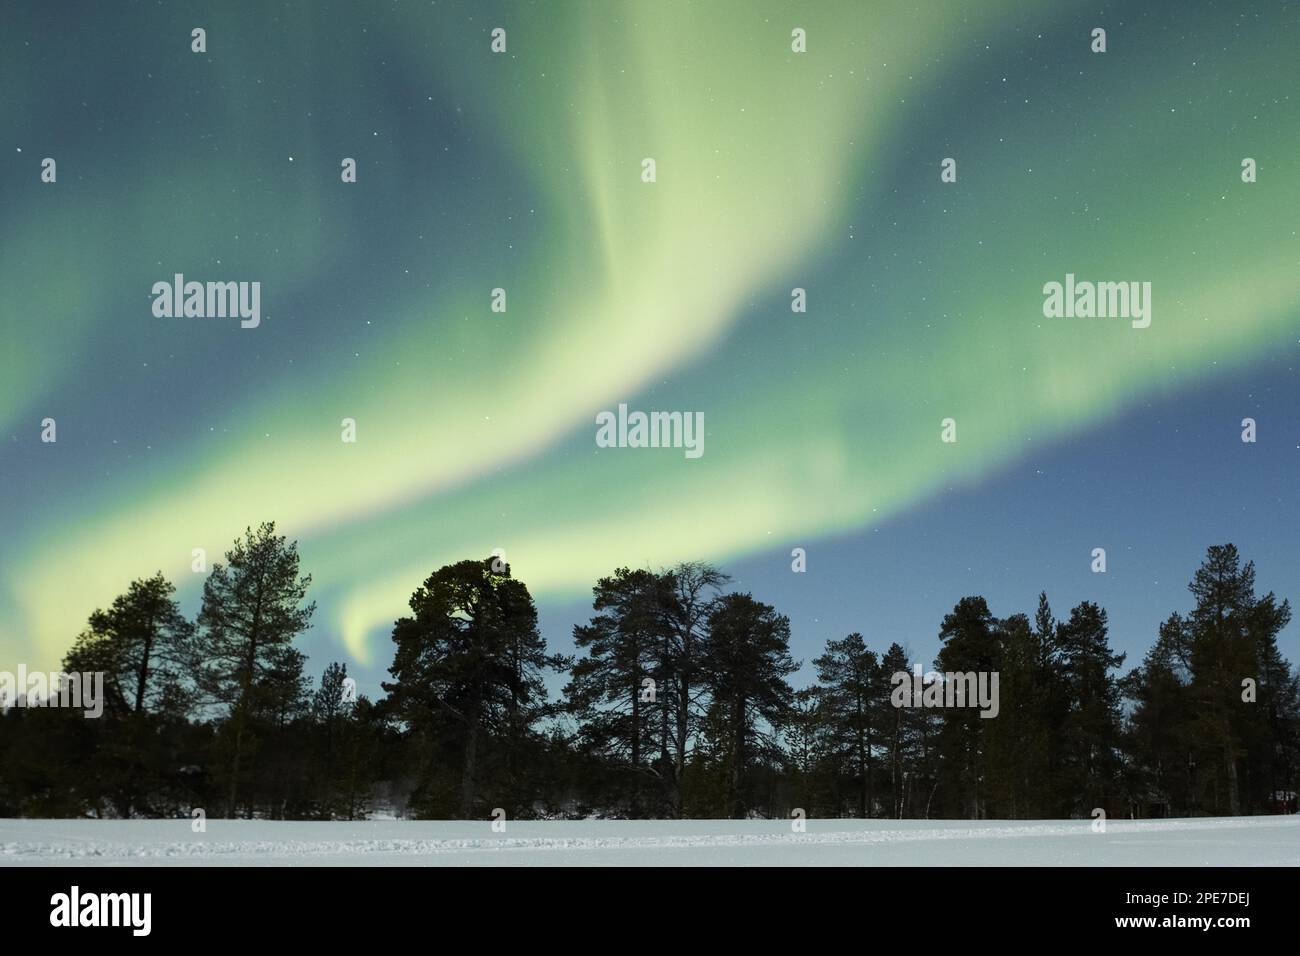 Aurora borealis, over snow-covered coniferous forest at night, Northern Finland Stock Photo